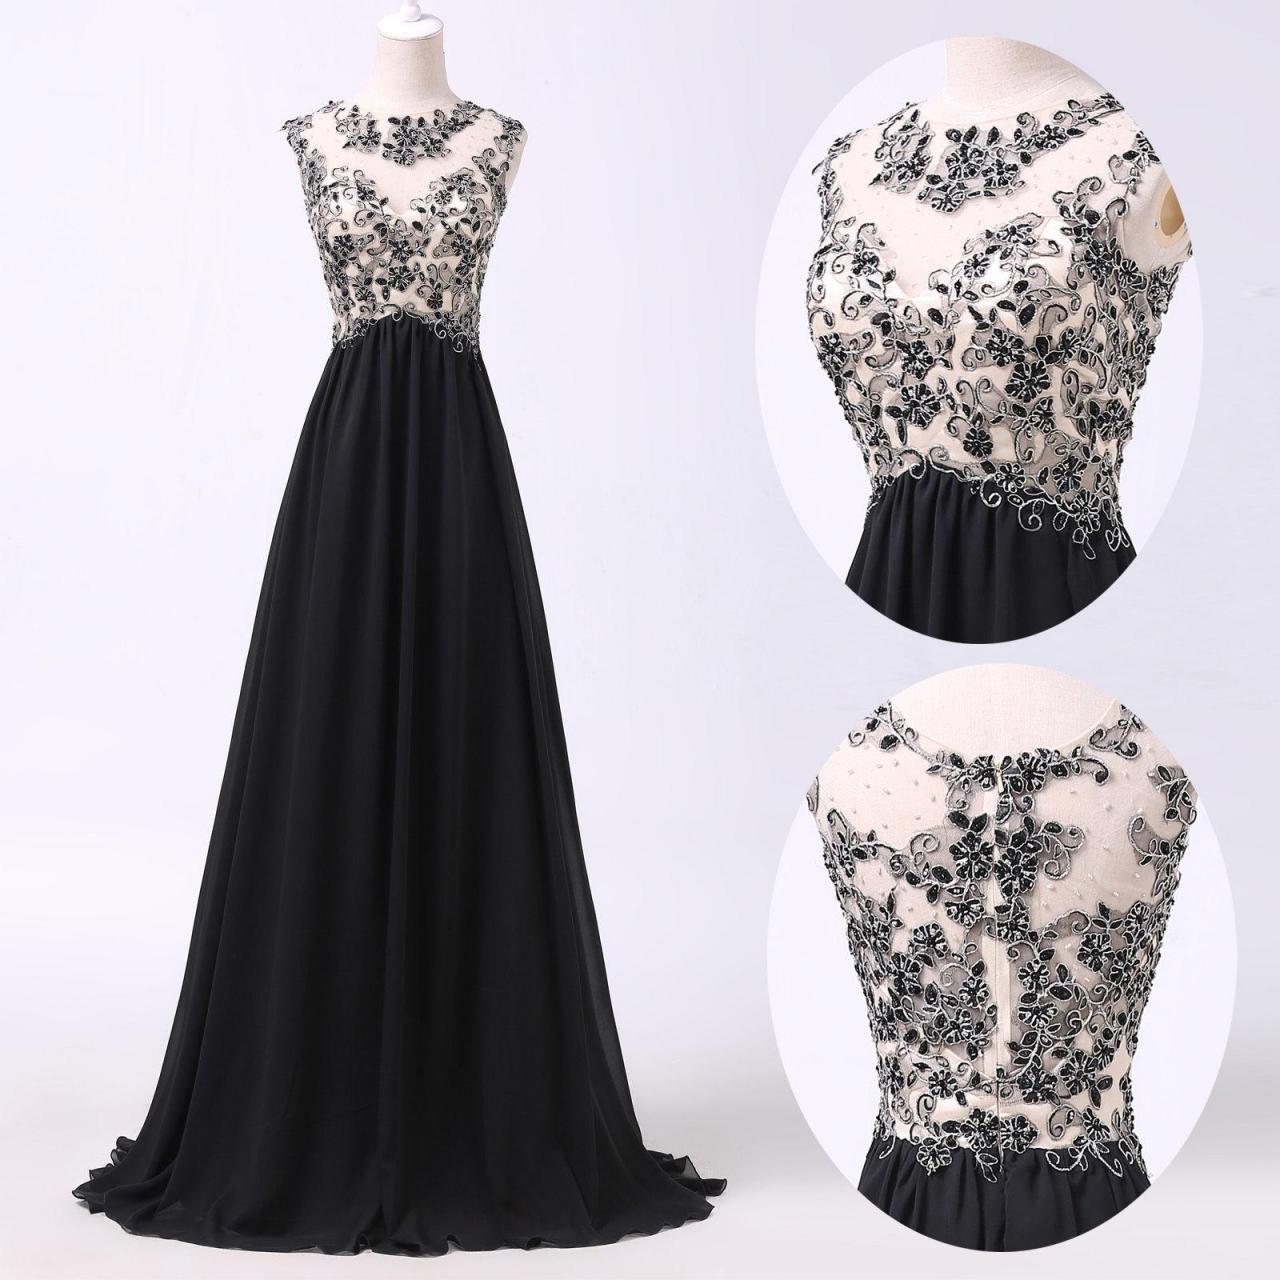 A Line Prom Dresses,black Lace Prom Dress,simple Prom Dress,modest Evening Gowns, Party Dresses,graduation Gowns,lace Evening Dresses,party Dress